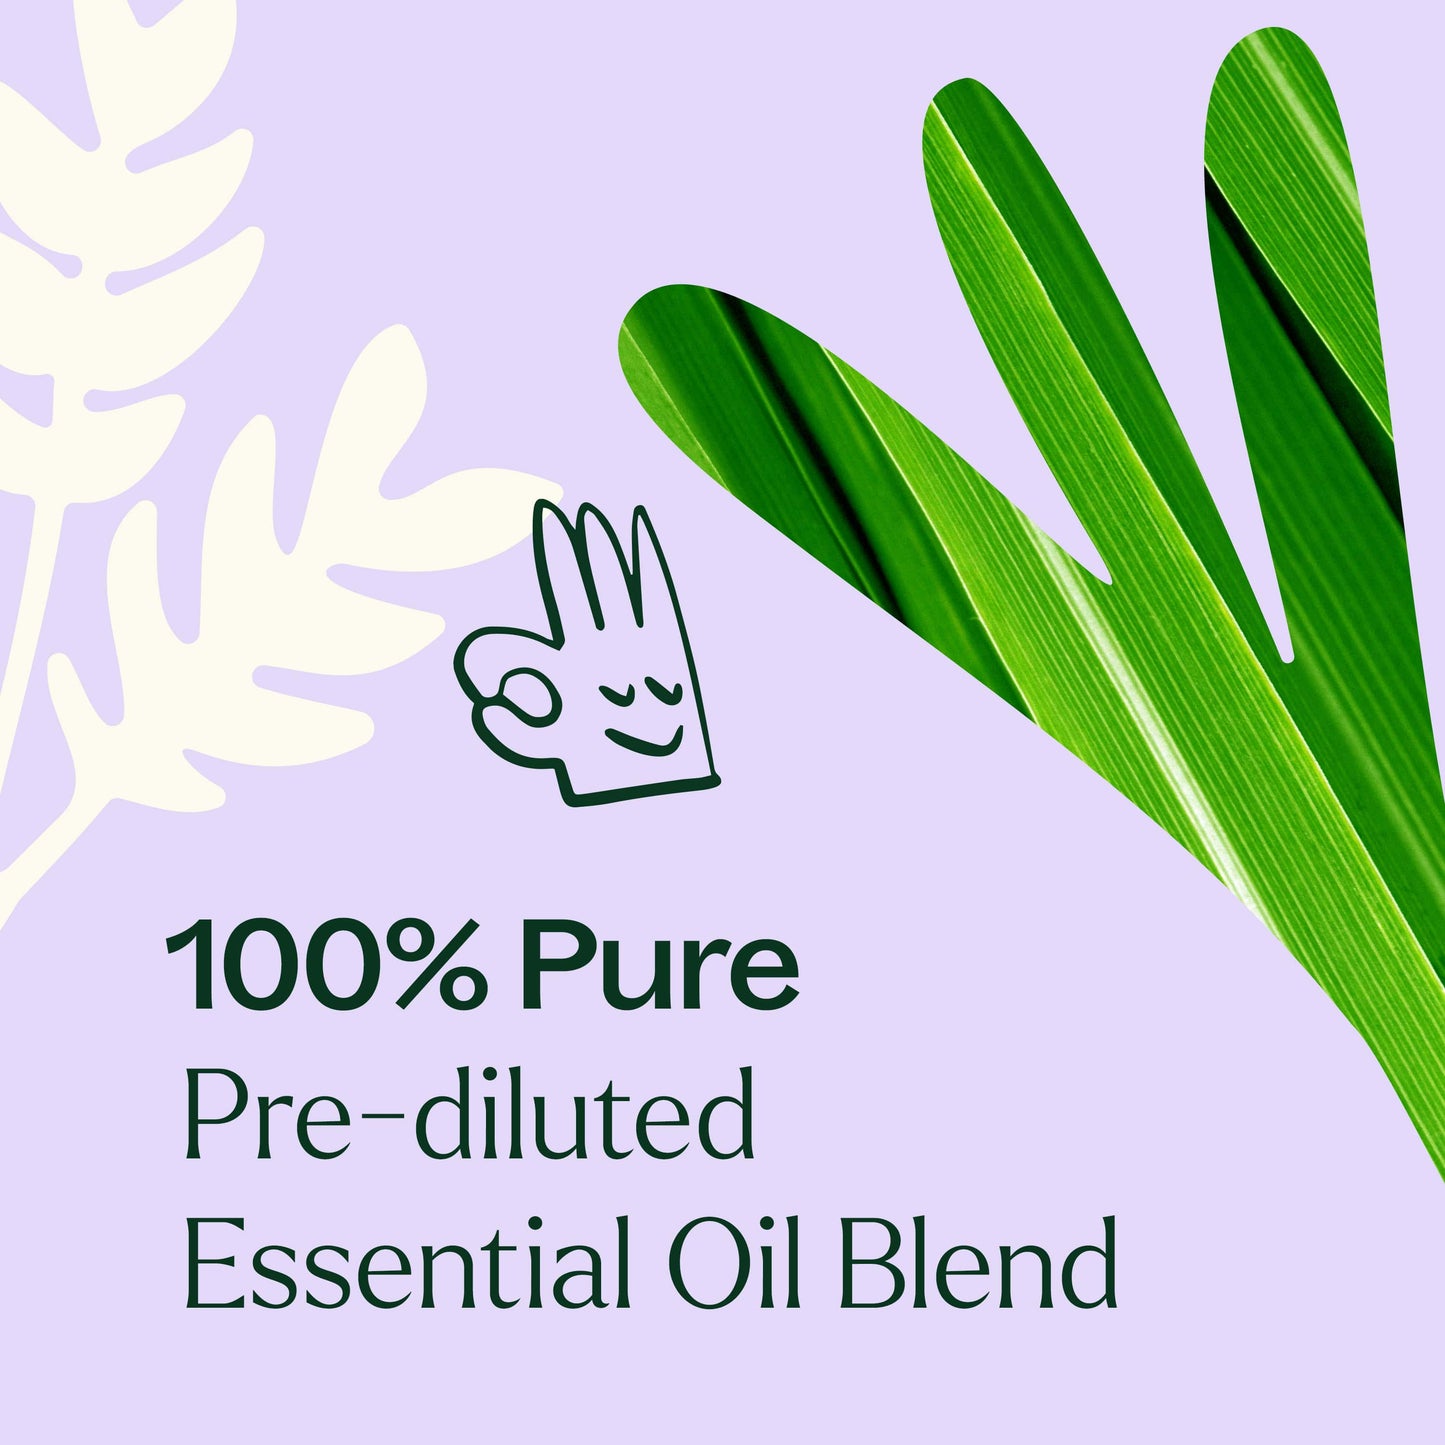 Anti Age Essential Oil Blend Pre-Diluted Roll-On is 100% pure